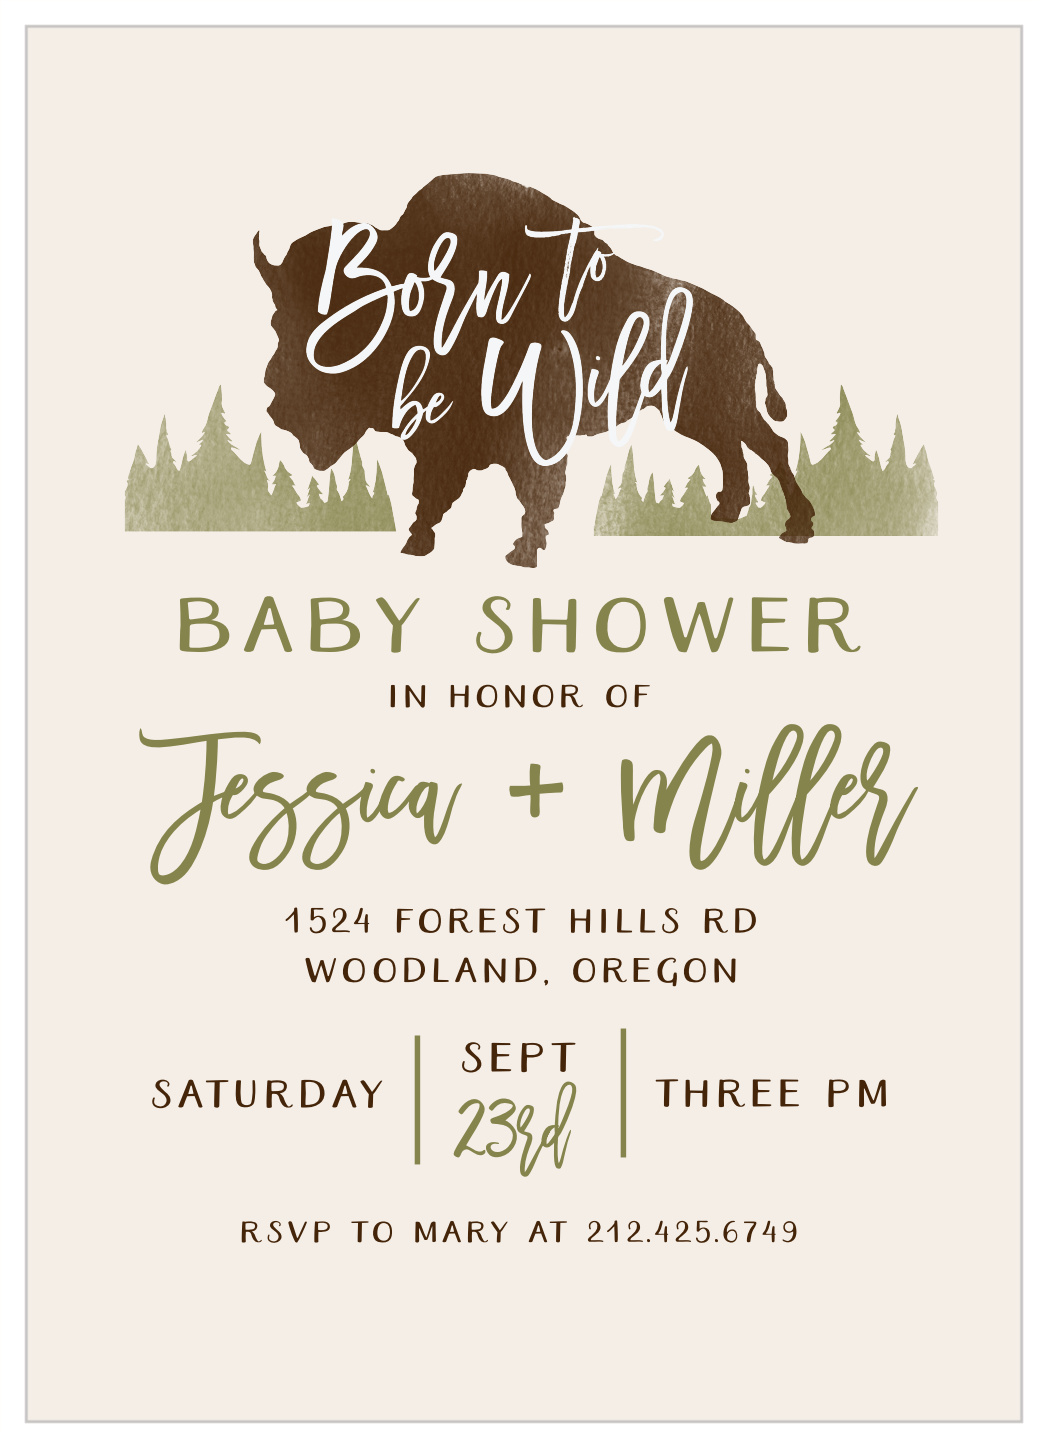 Born to Be Wild Baby Shower Invitations